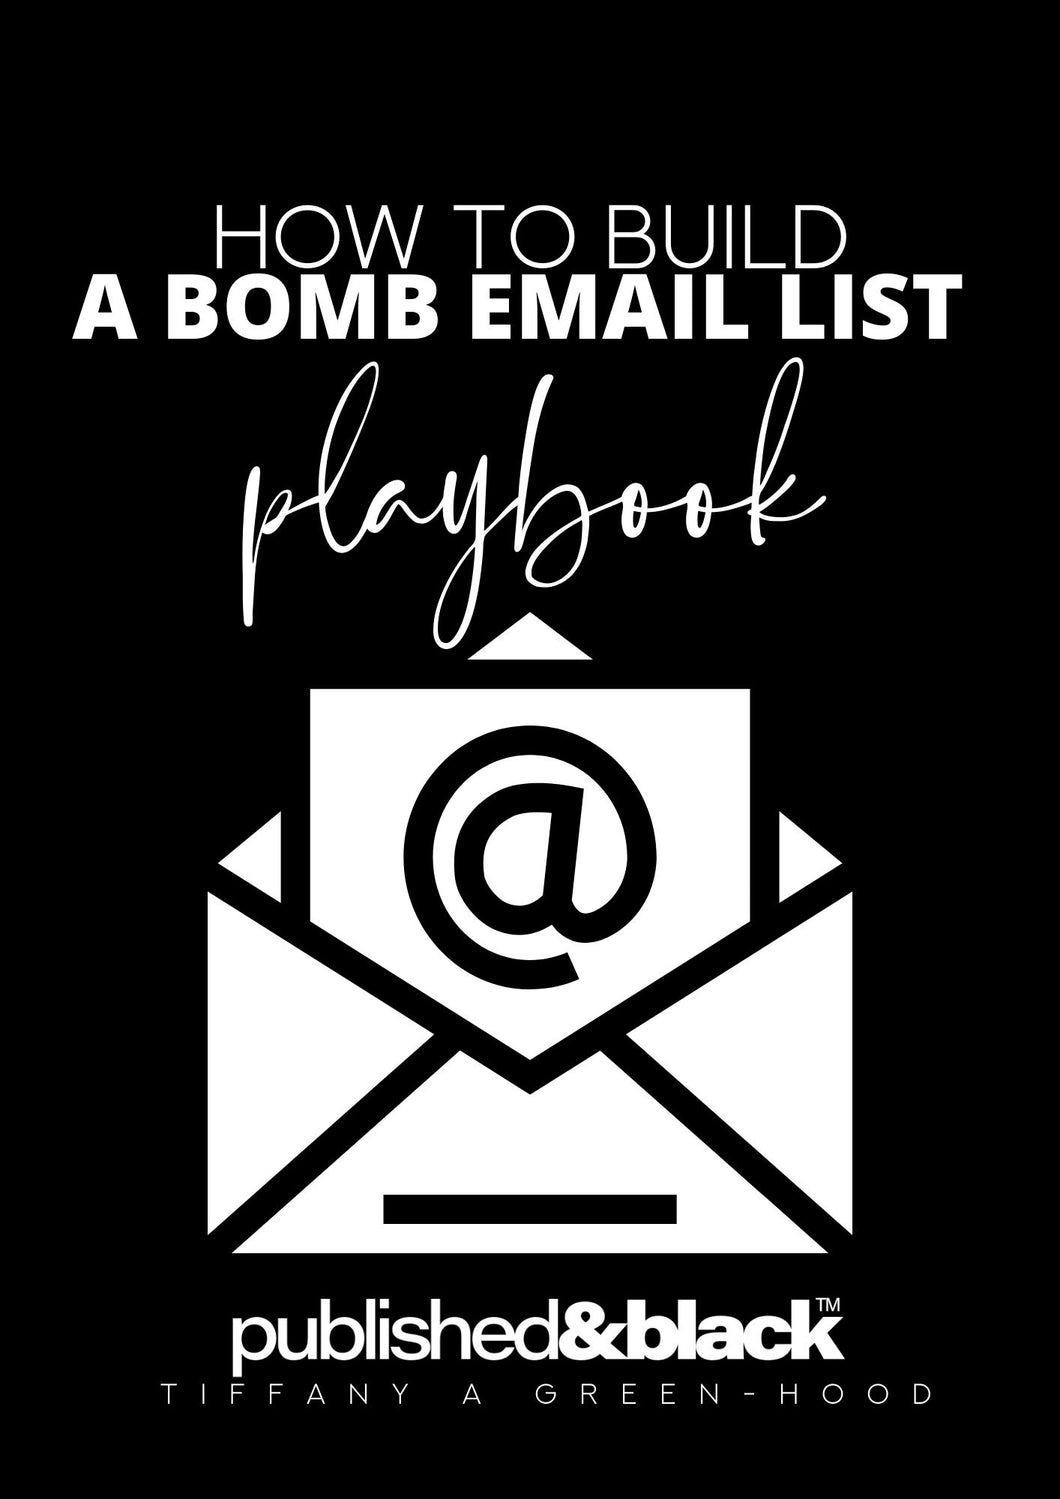 HOW TO BUILD A BOMB EMAIL LIST eBook